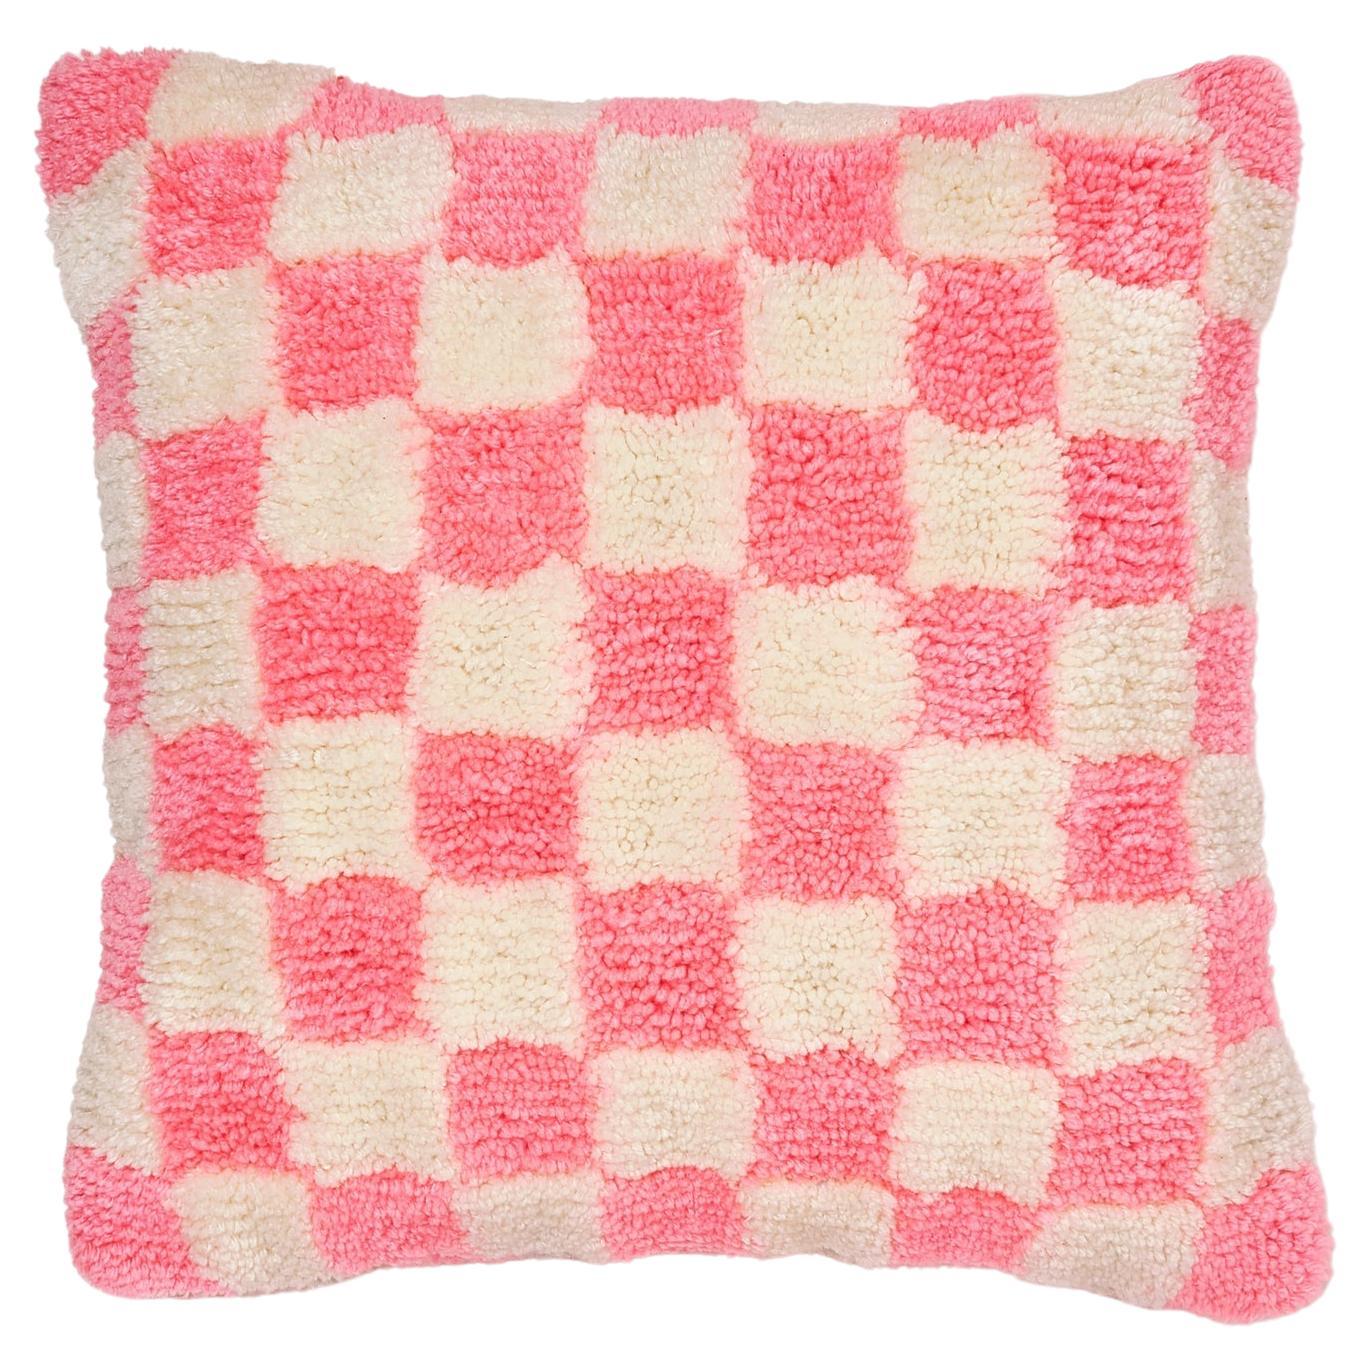 Pink and Cream Check Tufted Square Pillow For Sale